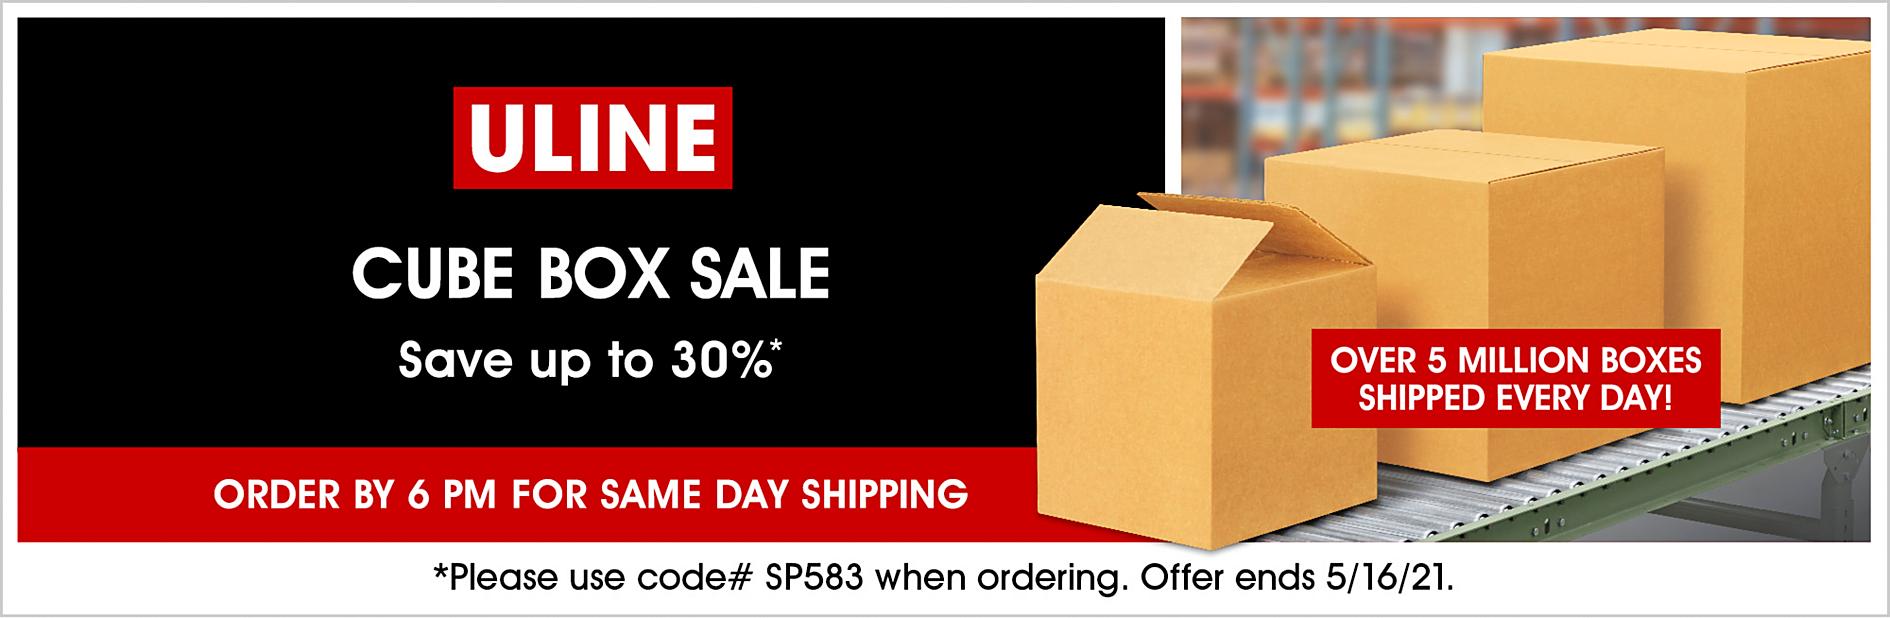 SP583 Cube Box Sale, Save up to 30%, Use code SP583, Offer ends 5/16/21